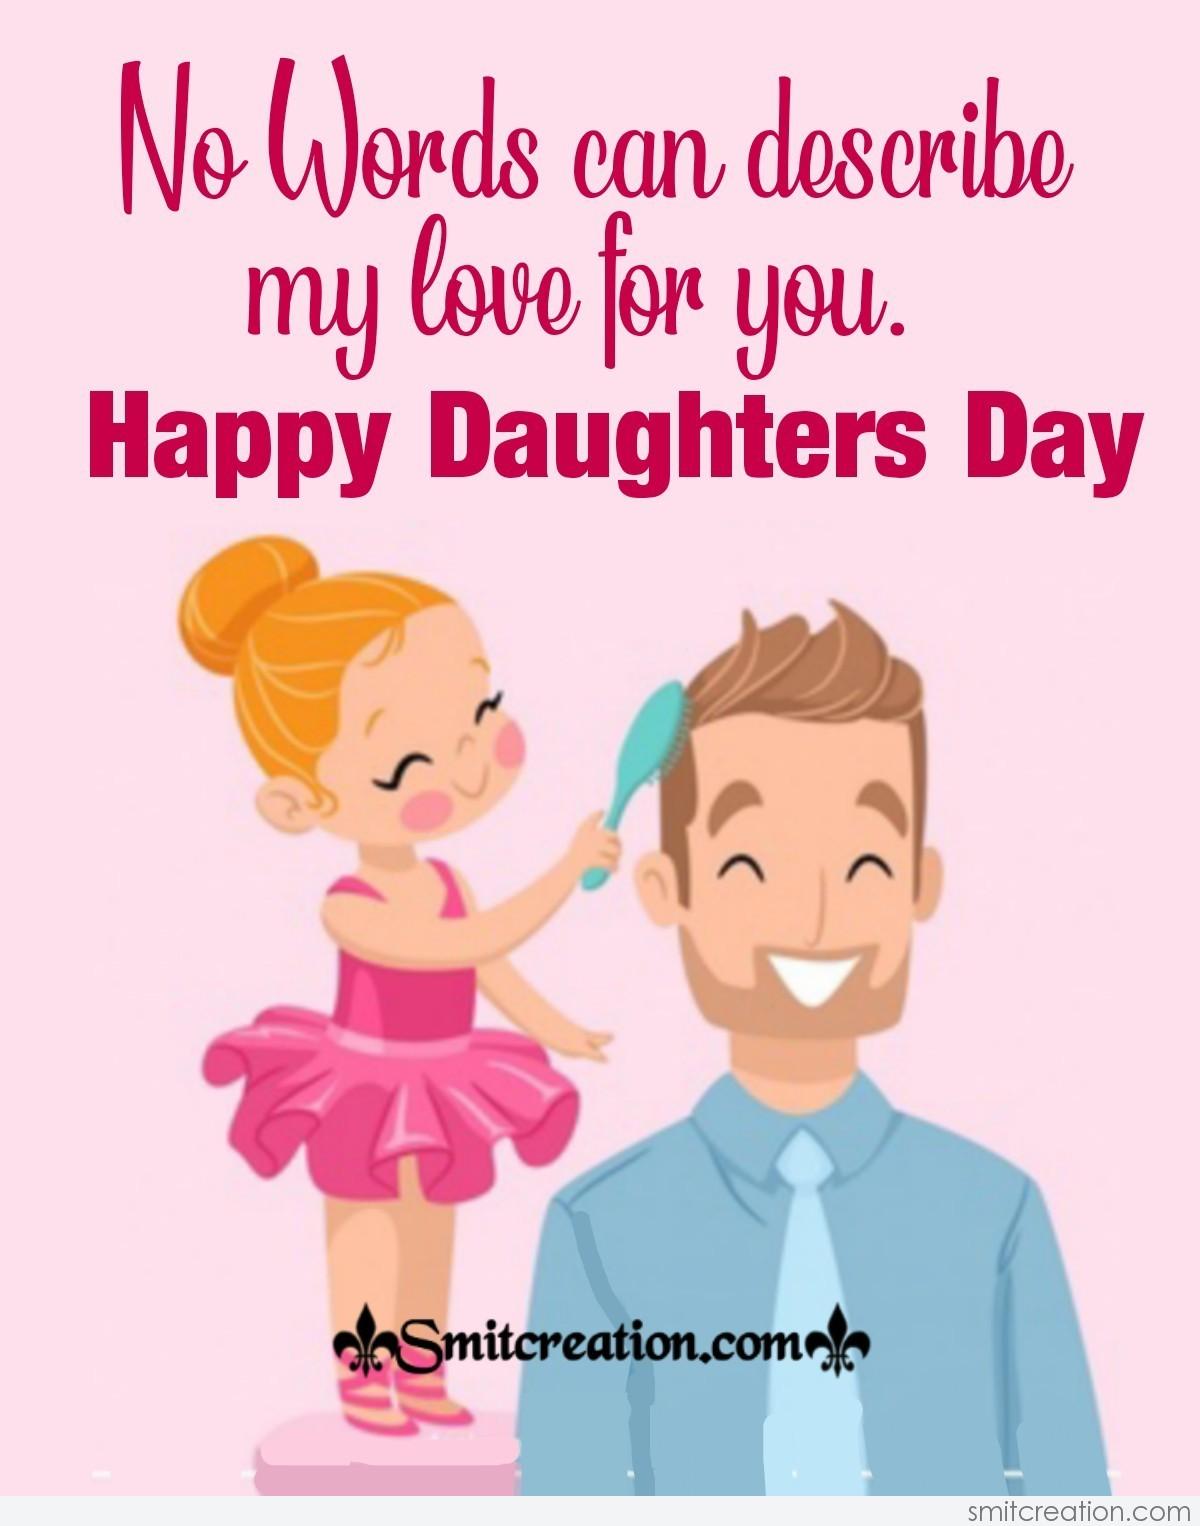 Happy daughter. Happy daughters Day. Happy father's Day daughters. Happy daughter Day картинки. Happy daughter's b Day.